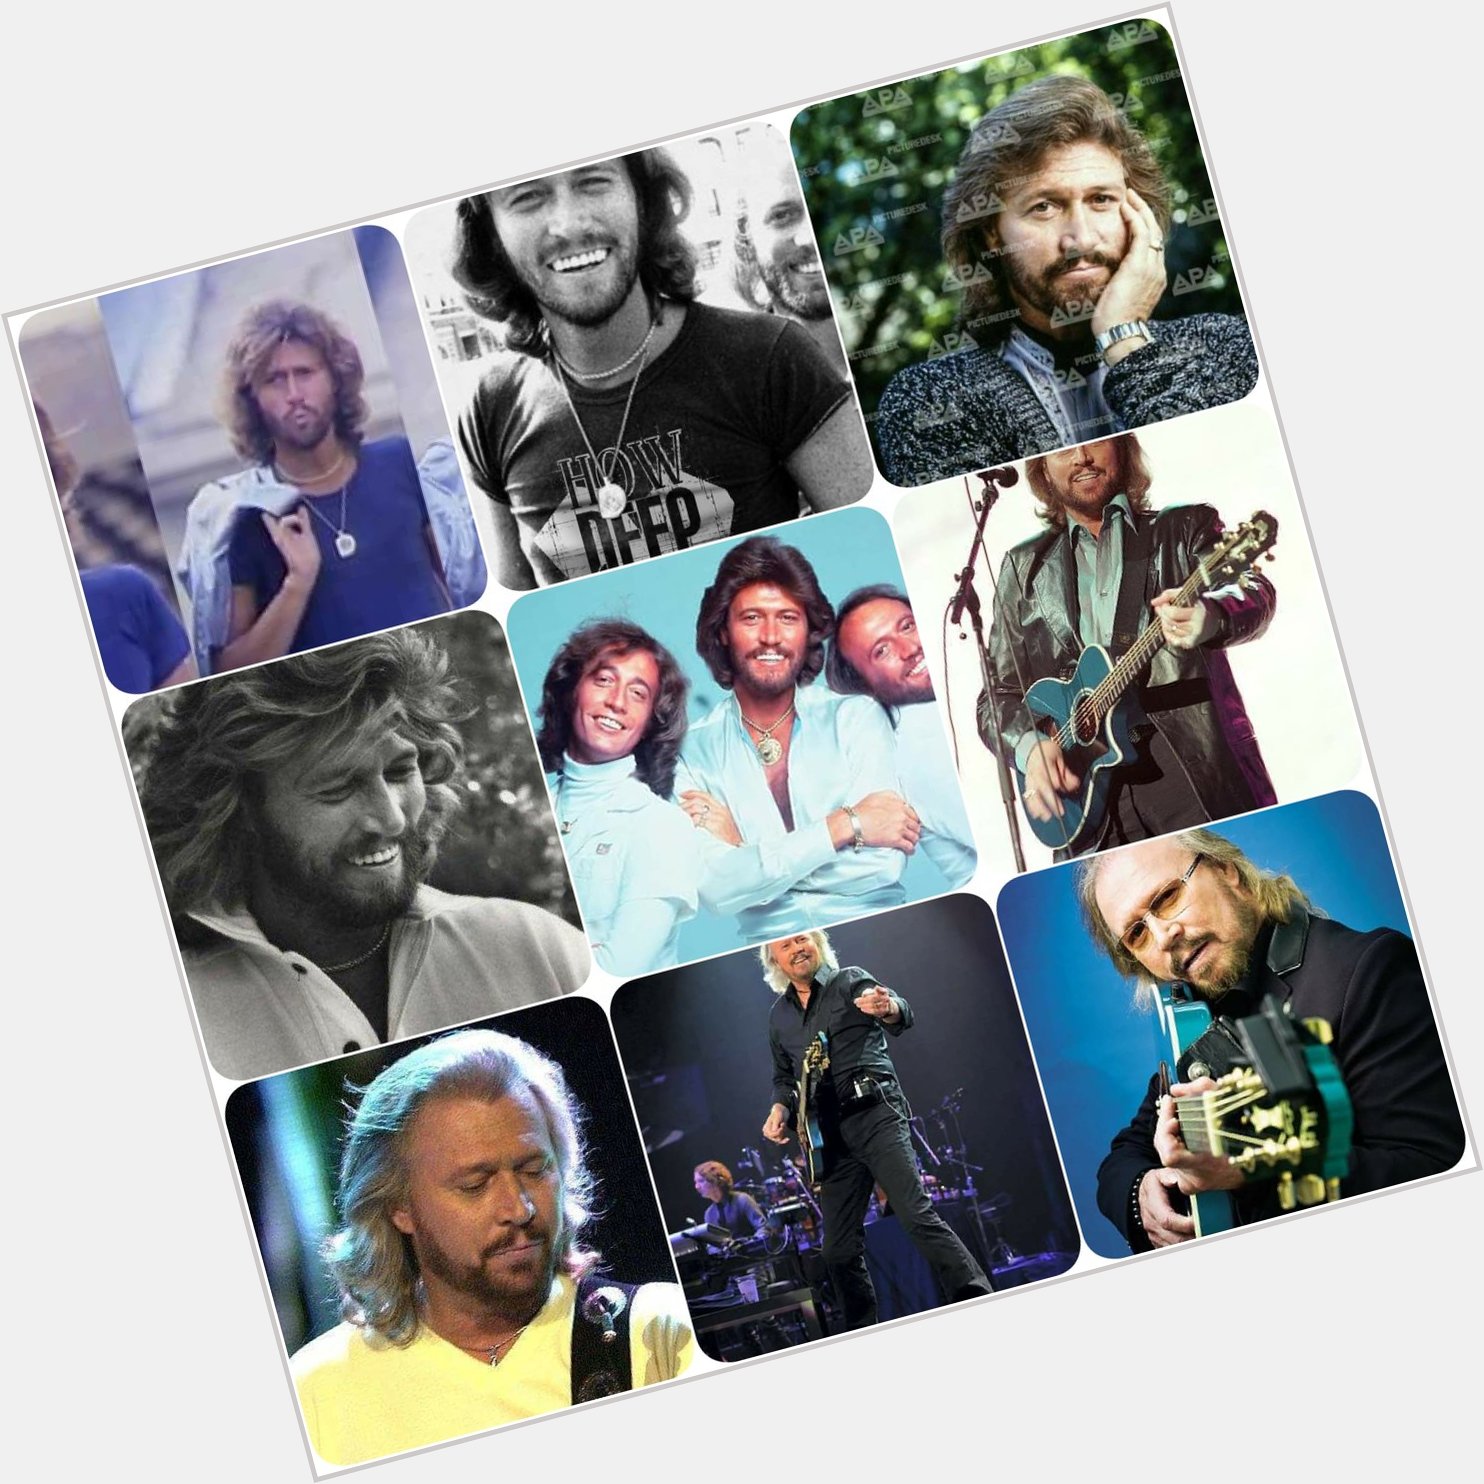  I hope your day is wonderful and filled with all the things you enjoy. Happy 71st birthday Barry Gibb. 